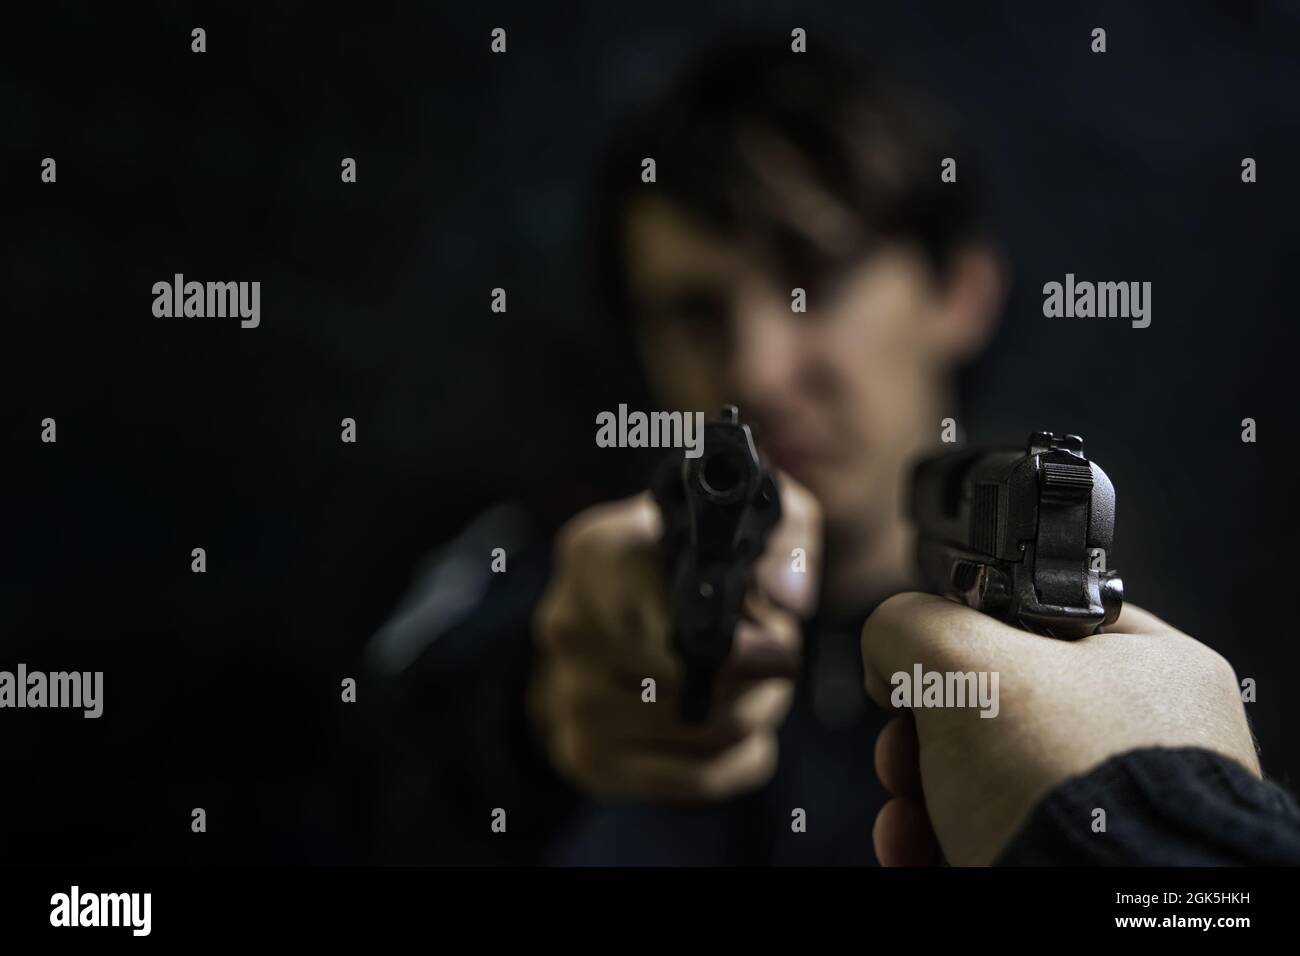 Man's hand with pistol pointed at criminal with revolver. Shootout of two thieves or murderers. Firearms for attack or defense. Stock Photo